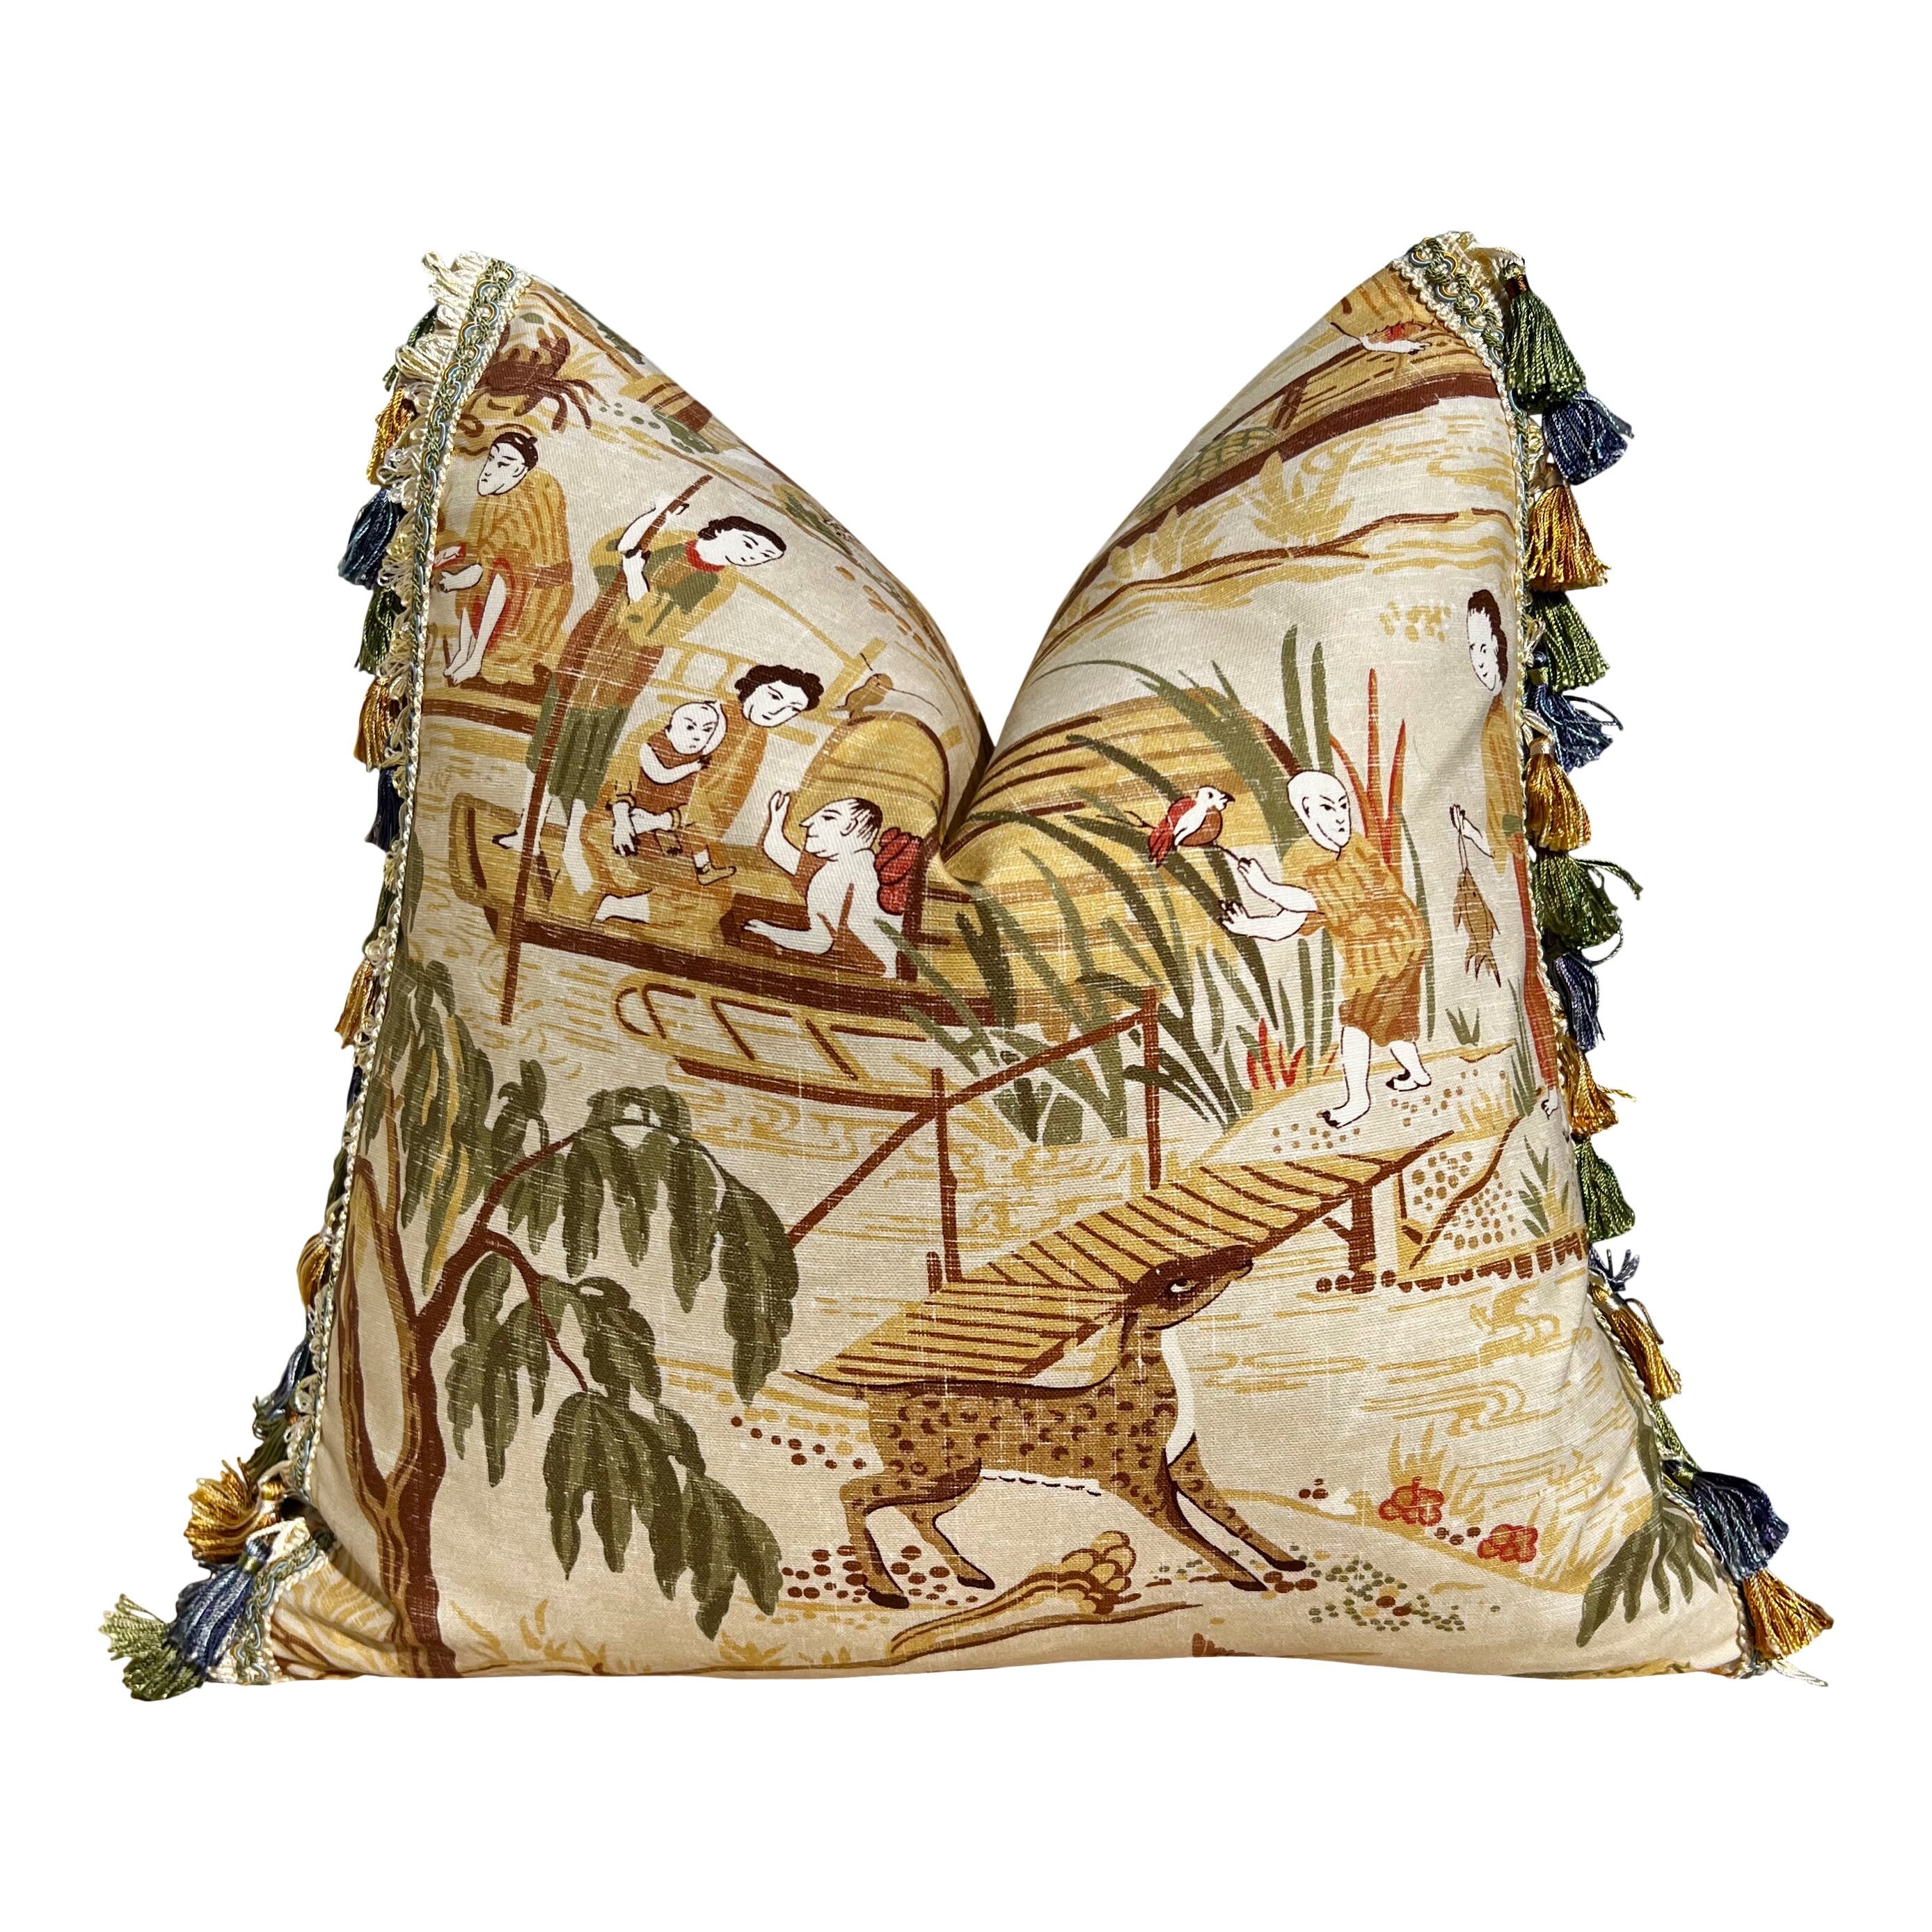 Thibaut Fishing Village Pillow in Beige with Tassel Trim, Chinoiserie Pillow Cover, Beige Green Decorative Pillows, Euro Sham Cover